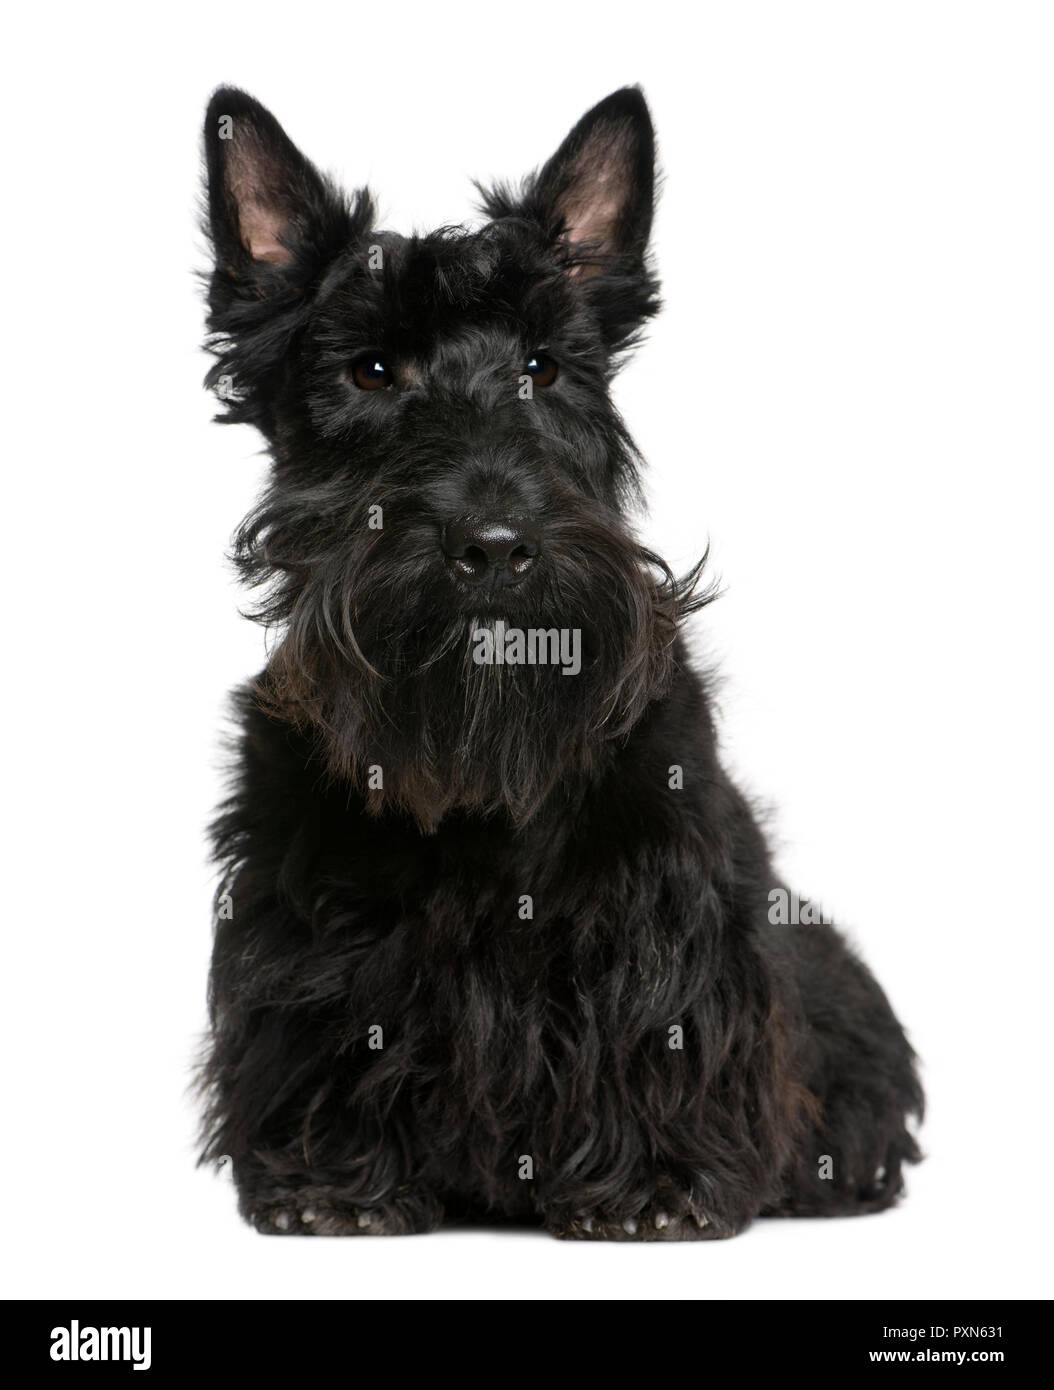 Scottish Terrier, 8 months old, sitting in front of white background Stock Photo